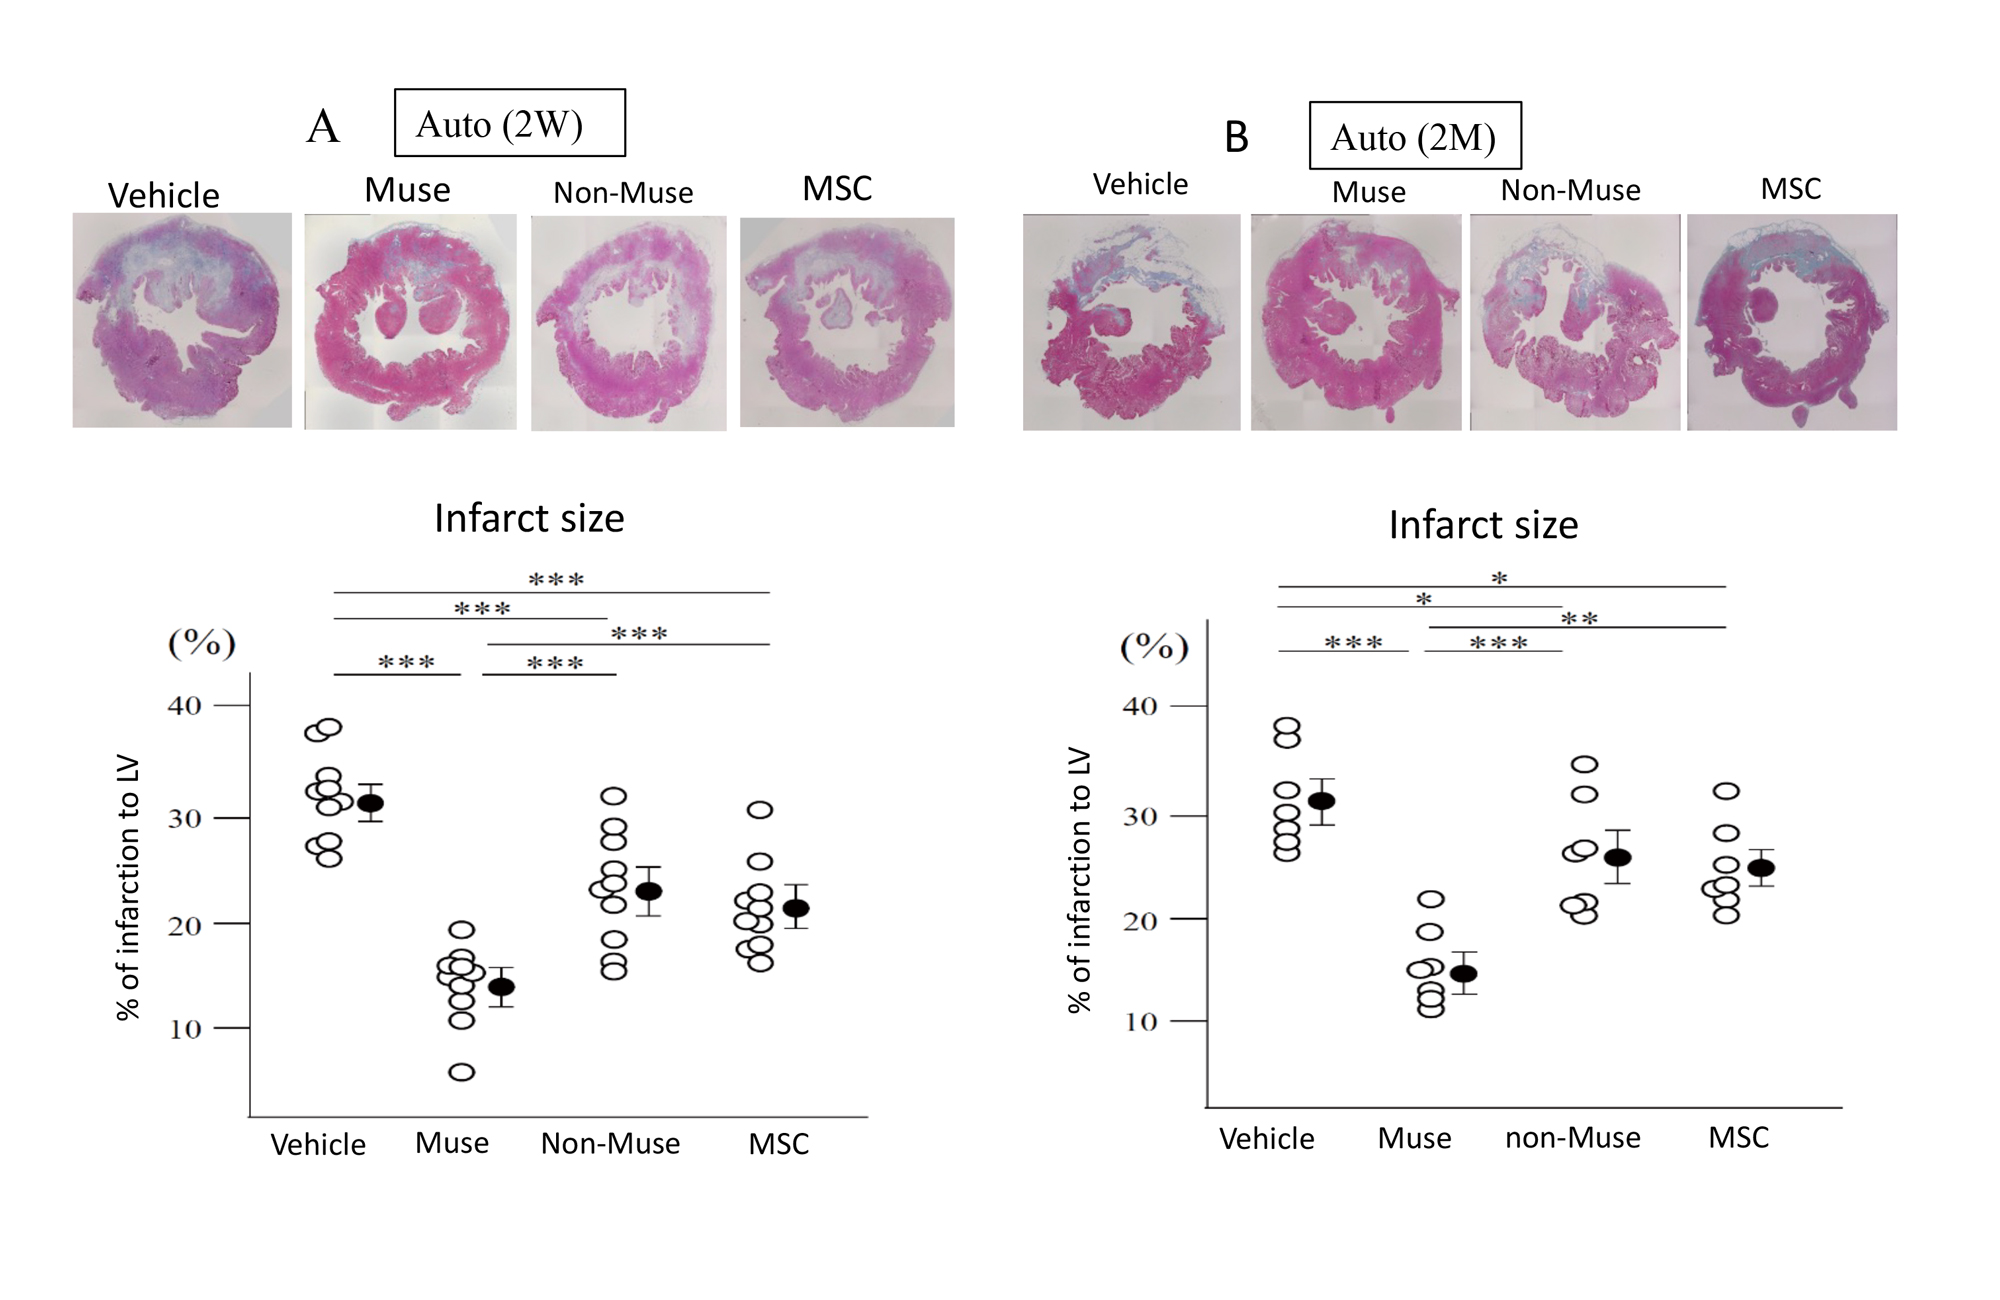 Figure 2. A, Effects of autograft Muse cells, non-Muse cells and MSCs on infarct size (2 weeks after AMI). B, Effects of autograft Muse cells, non-Muse cells, and MSCs on infarct size (2 months after AMI). * p < 0.05; ** p < 0.01; *** p < 0.001; AMI, acute myocardial infarction; MSC, mesenchymal stem cell.  [Reproduced from Ref. 19]